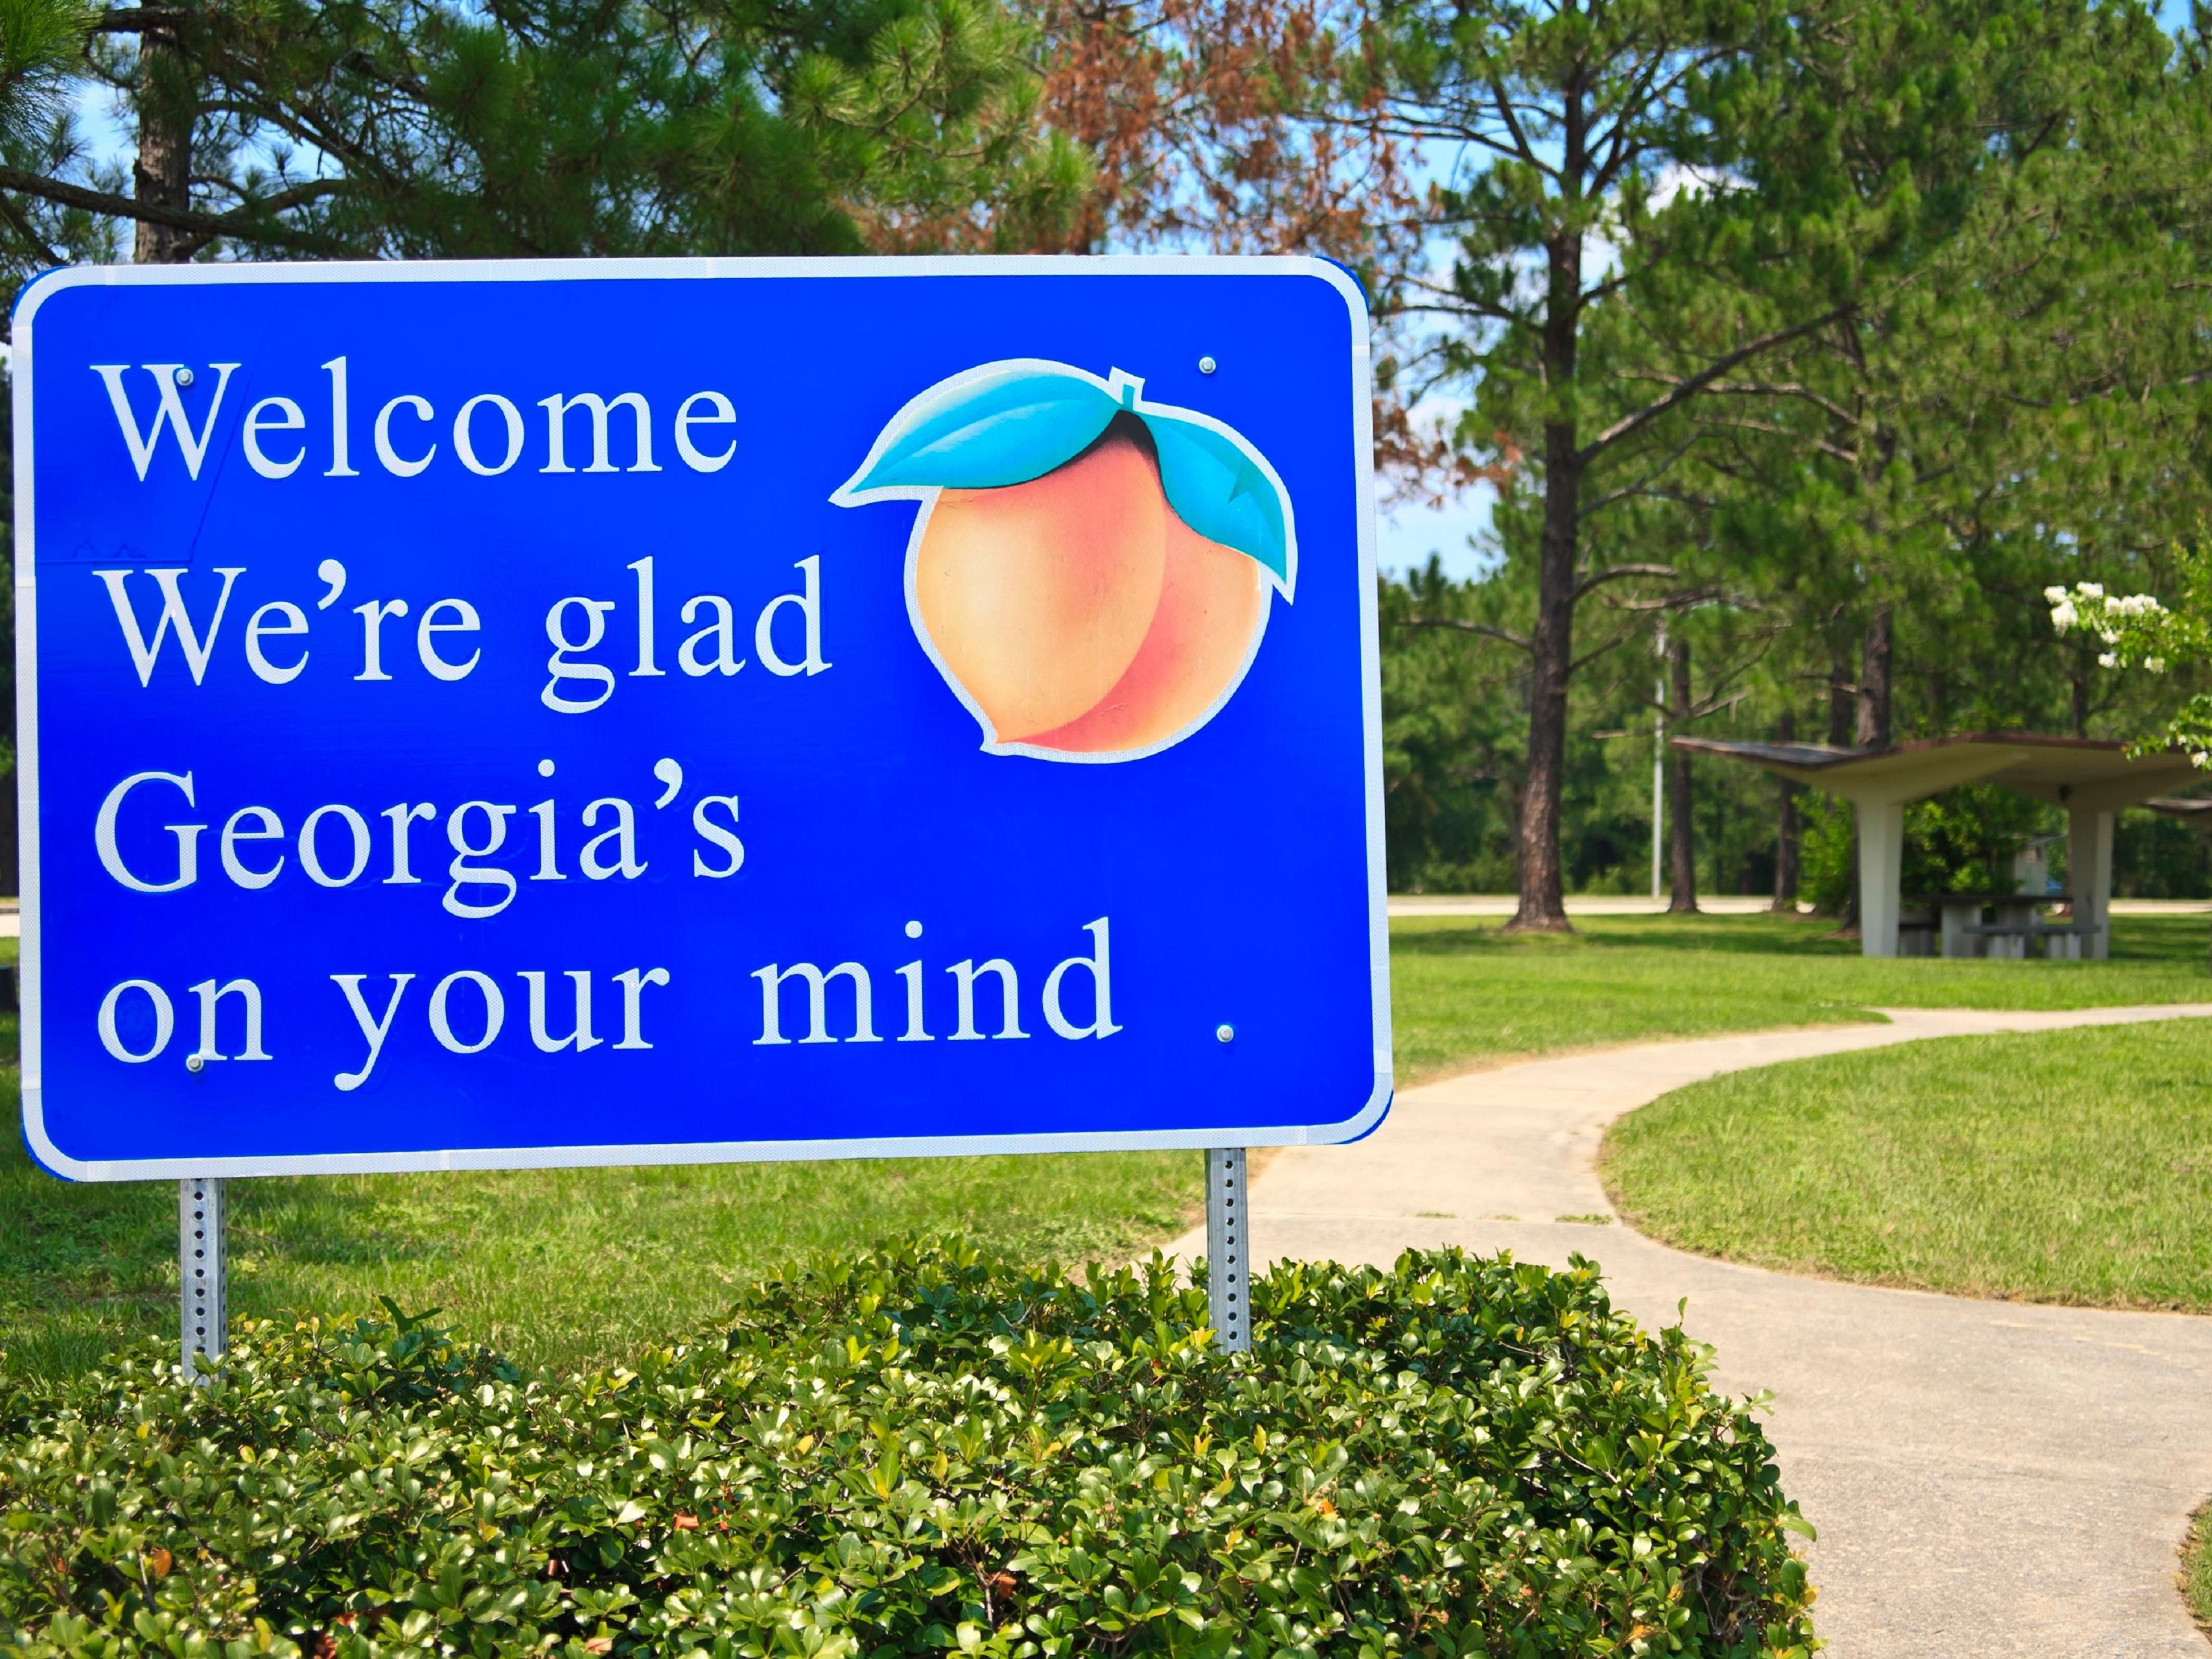 Georgia- There's So Much More